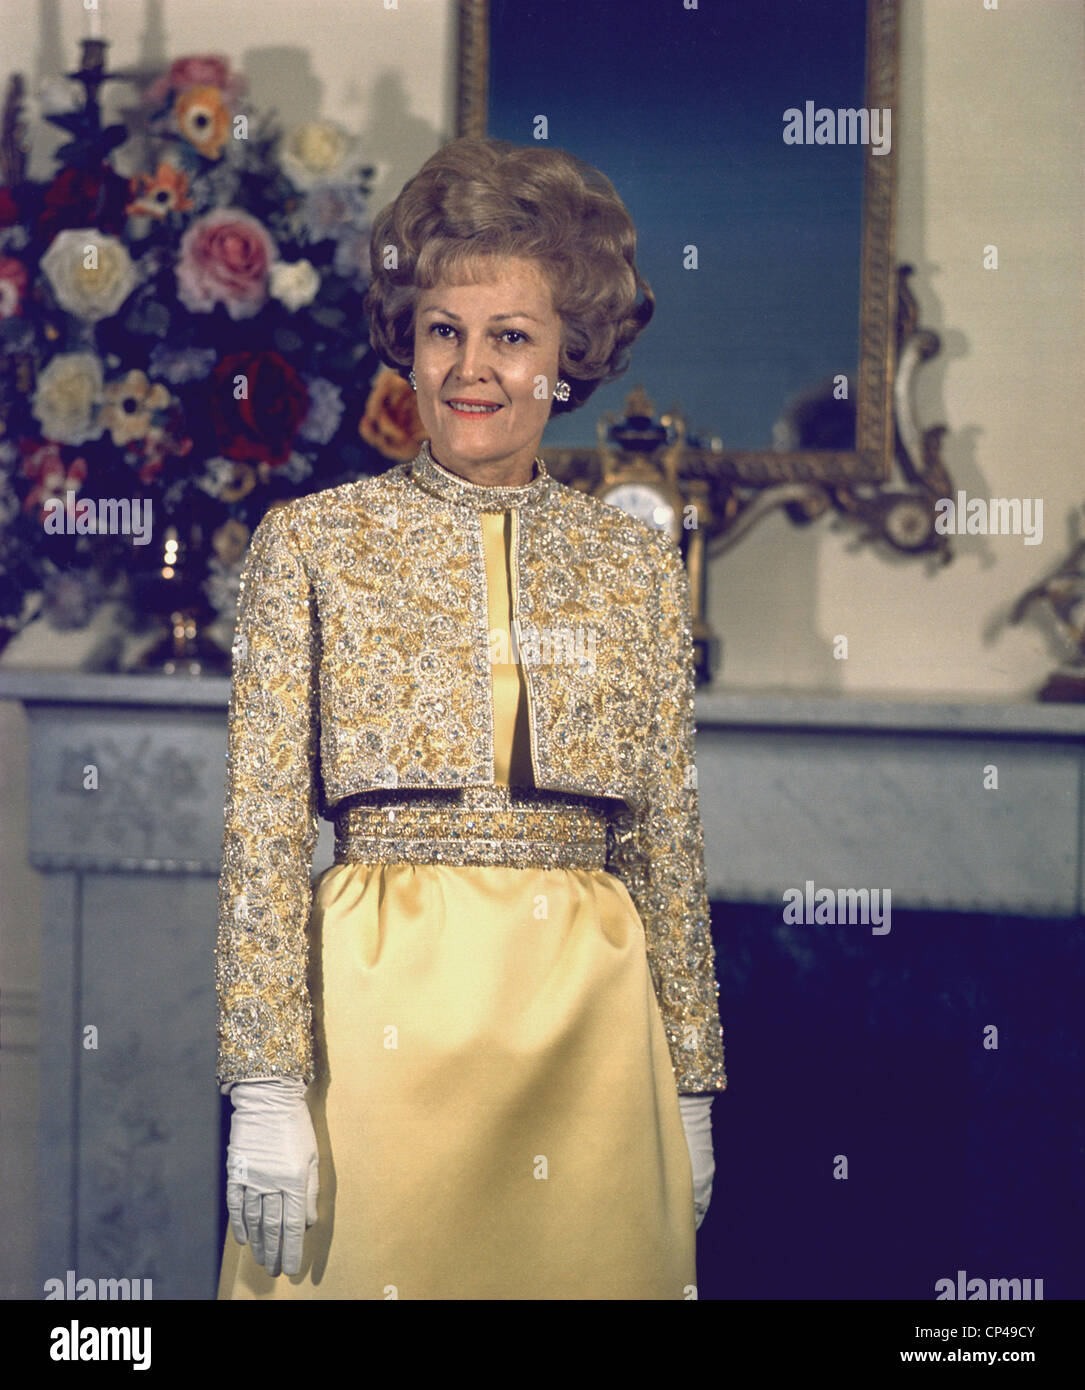 Patricia Nixon models her Harvey Berin inaugural gown in the Nixon's New York apartment on Jan 16 1969. The jacket and waist Stock Photo